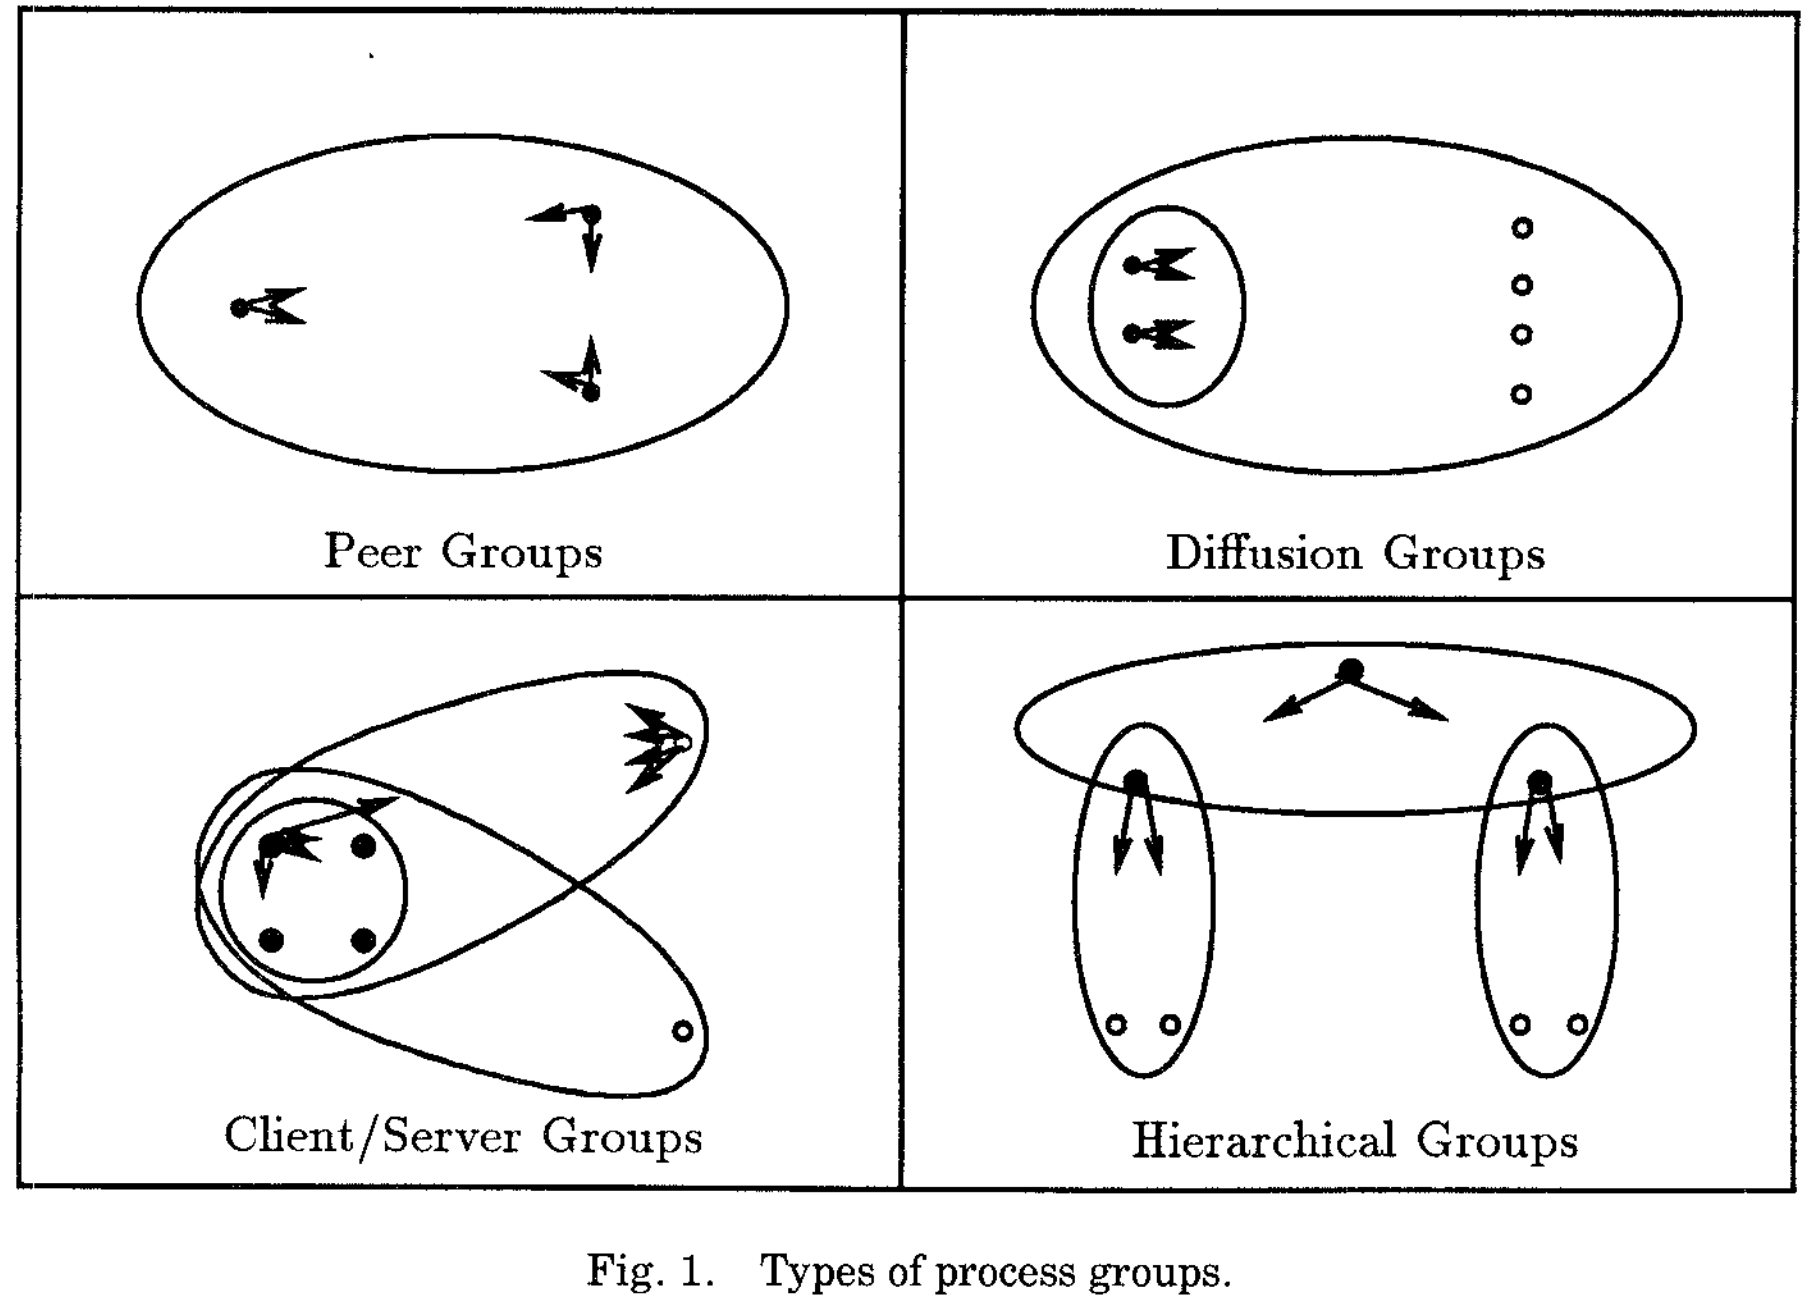 Types of process groups.